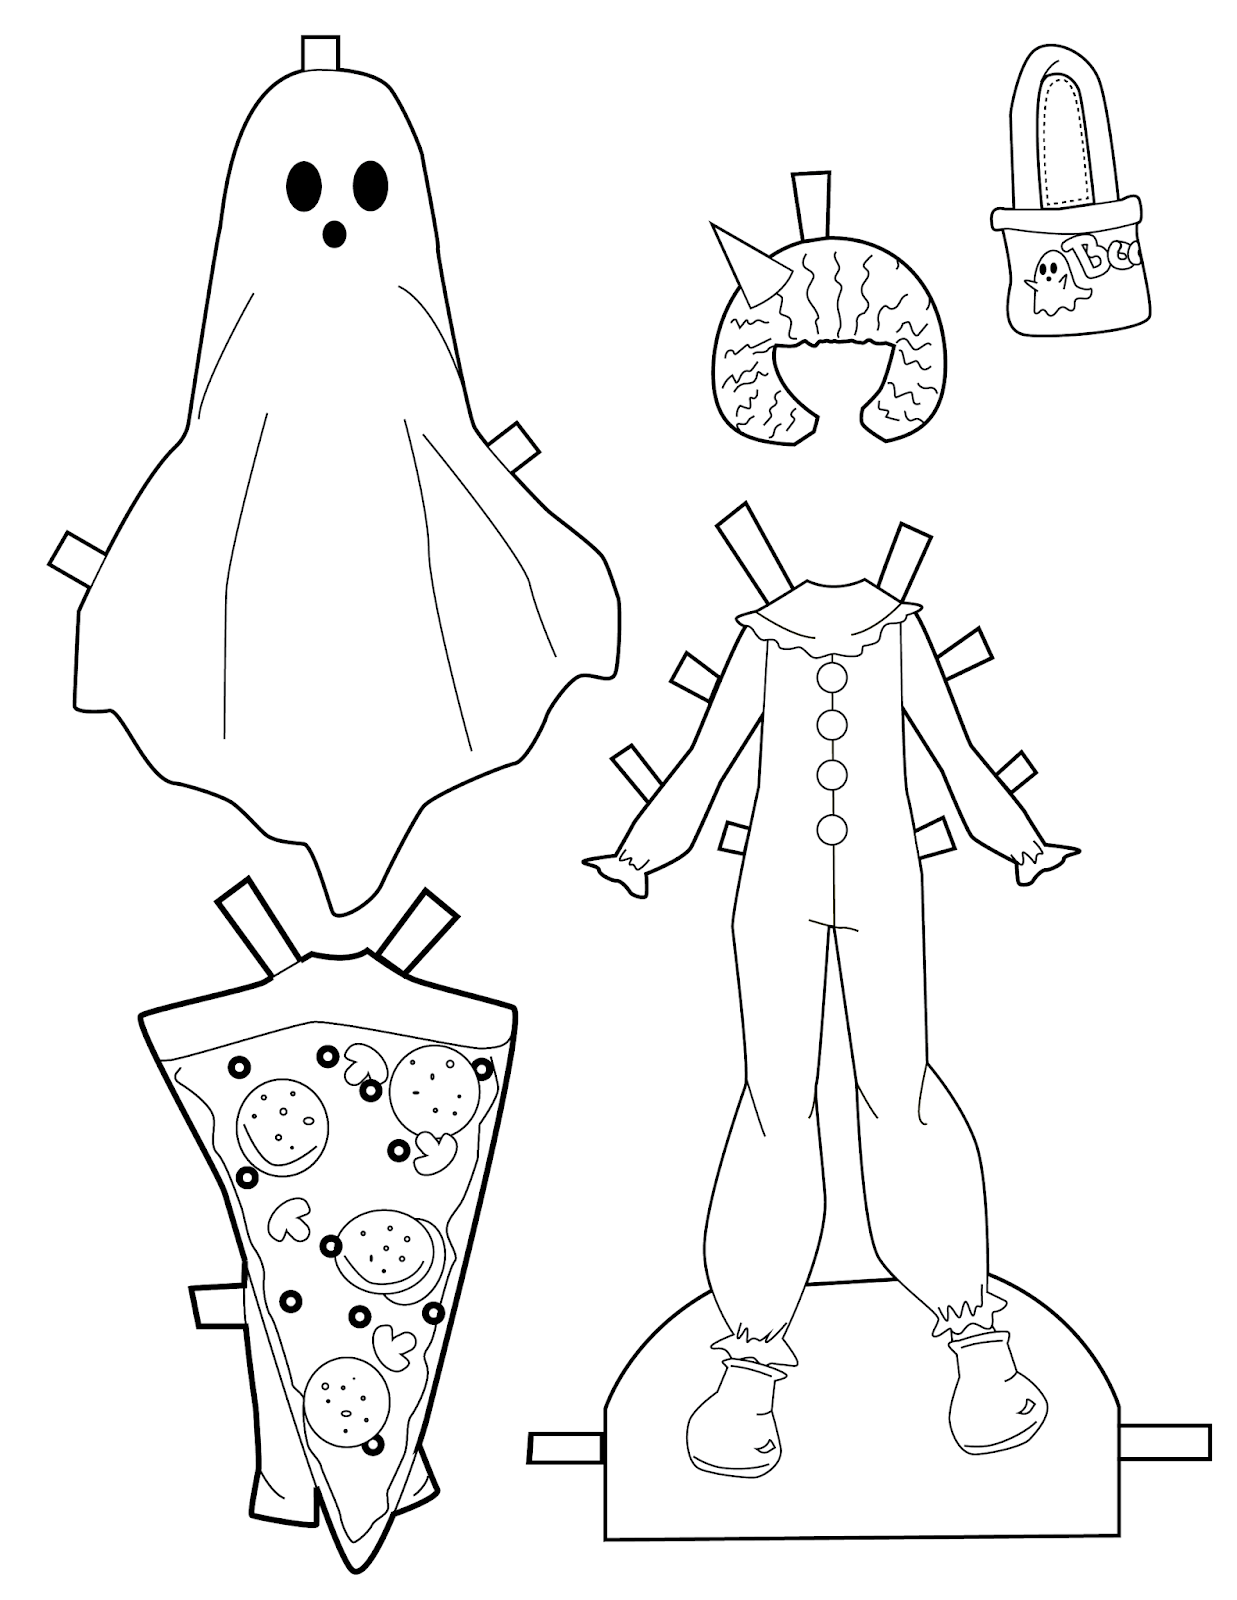 miss-missy-paper-dolls-black-and-white-halloween-paper-doll